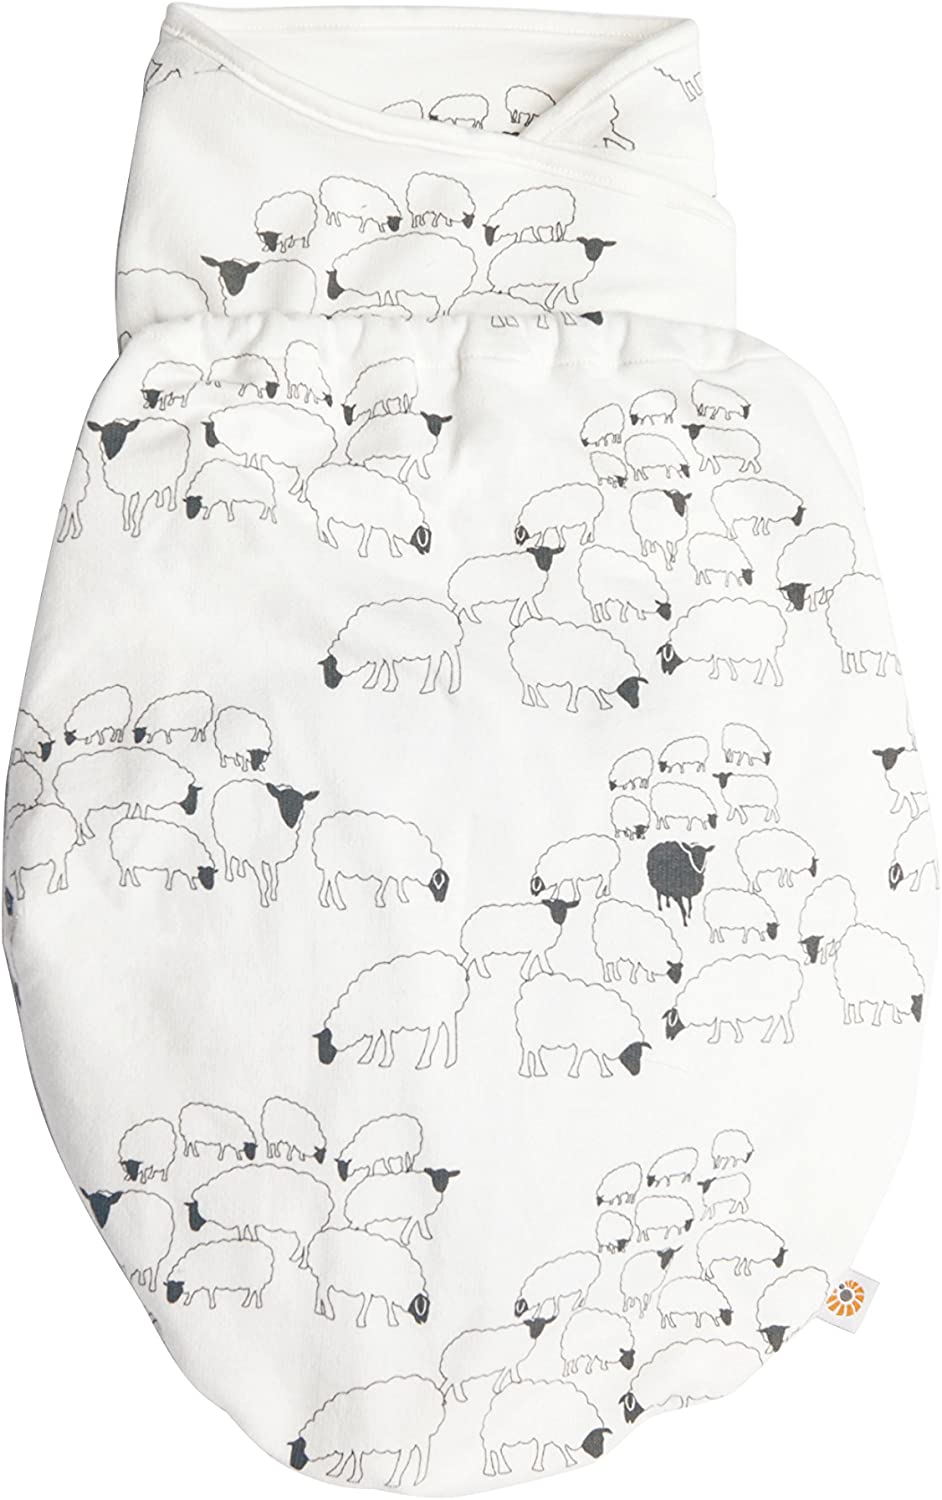 ergobaby swaddle wrap sheep sleeping bag with hip positioner and arm pouches, swaddle blanket